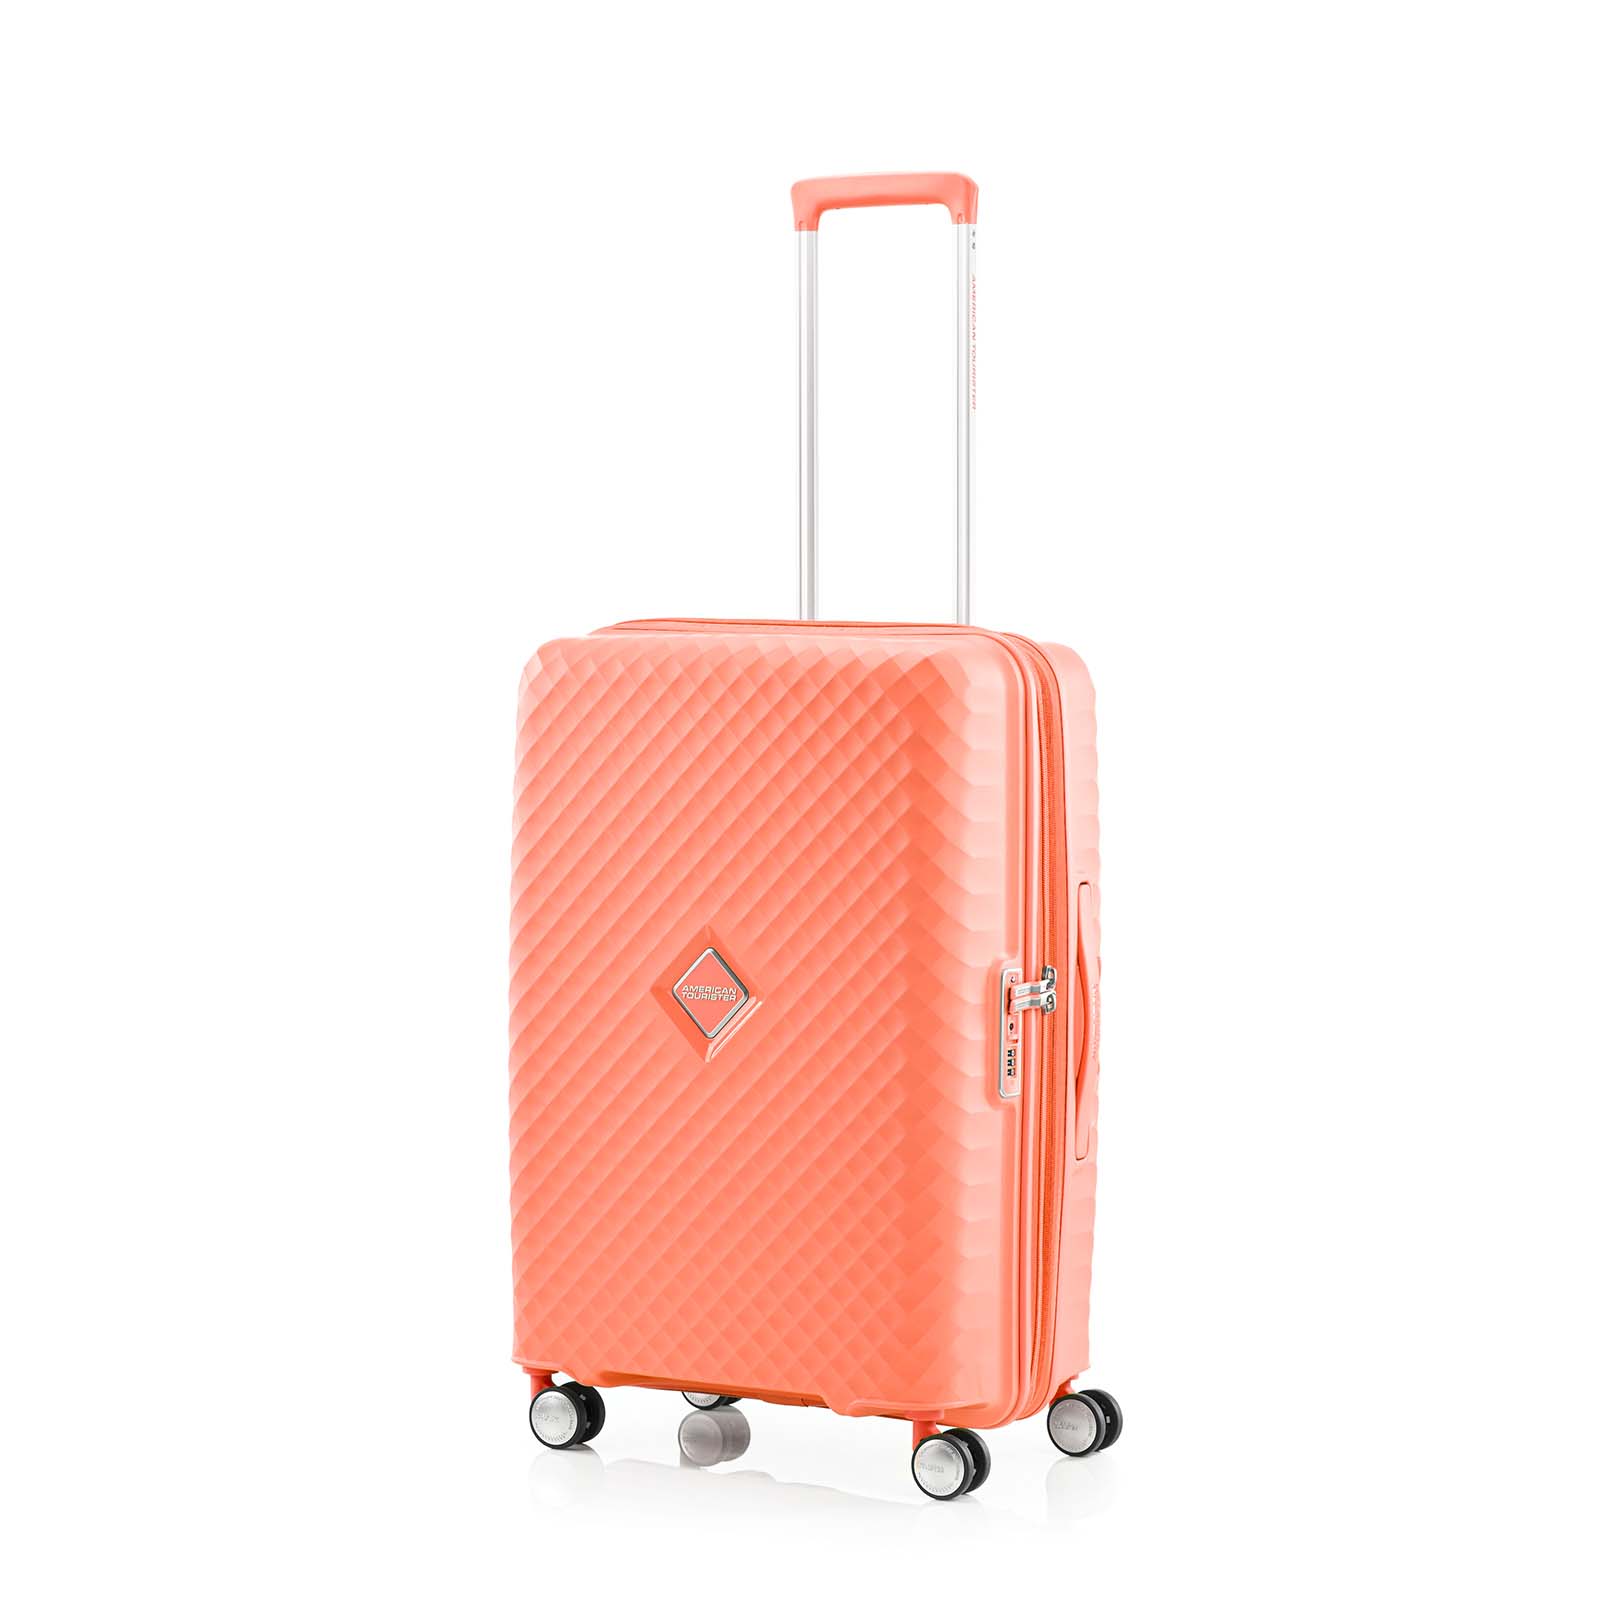 American-Tourister-Squasem-66cm-Suitcase-Bright-Coral-Front-Angle